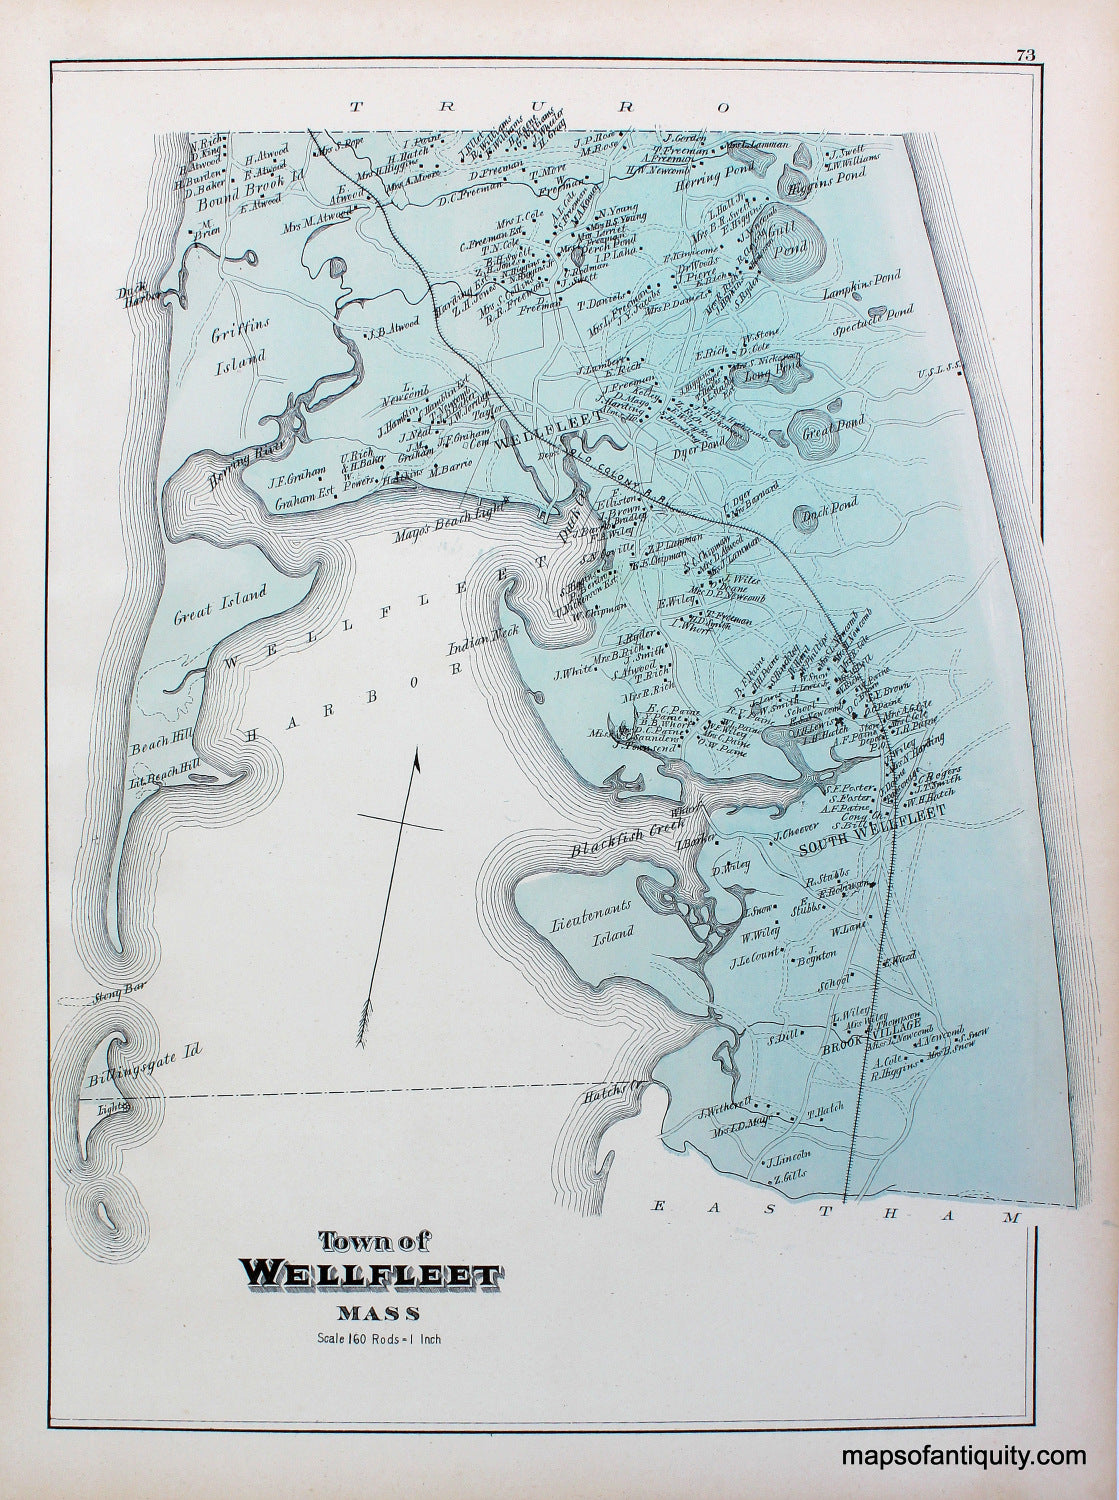 Reproduction-Town-of-Wellfleet-pp.-73-Town-and-Village-Maps-Atlas-of-Barnstable-County-Walker-1880.---Reproduction---Reproduction-Cape-Cod-and-Islands-Reproduction--Maps-Of-Antiquity